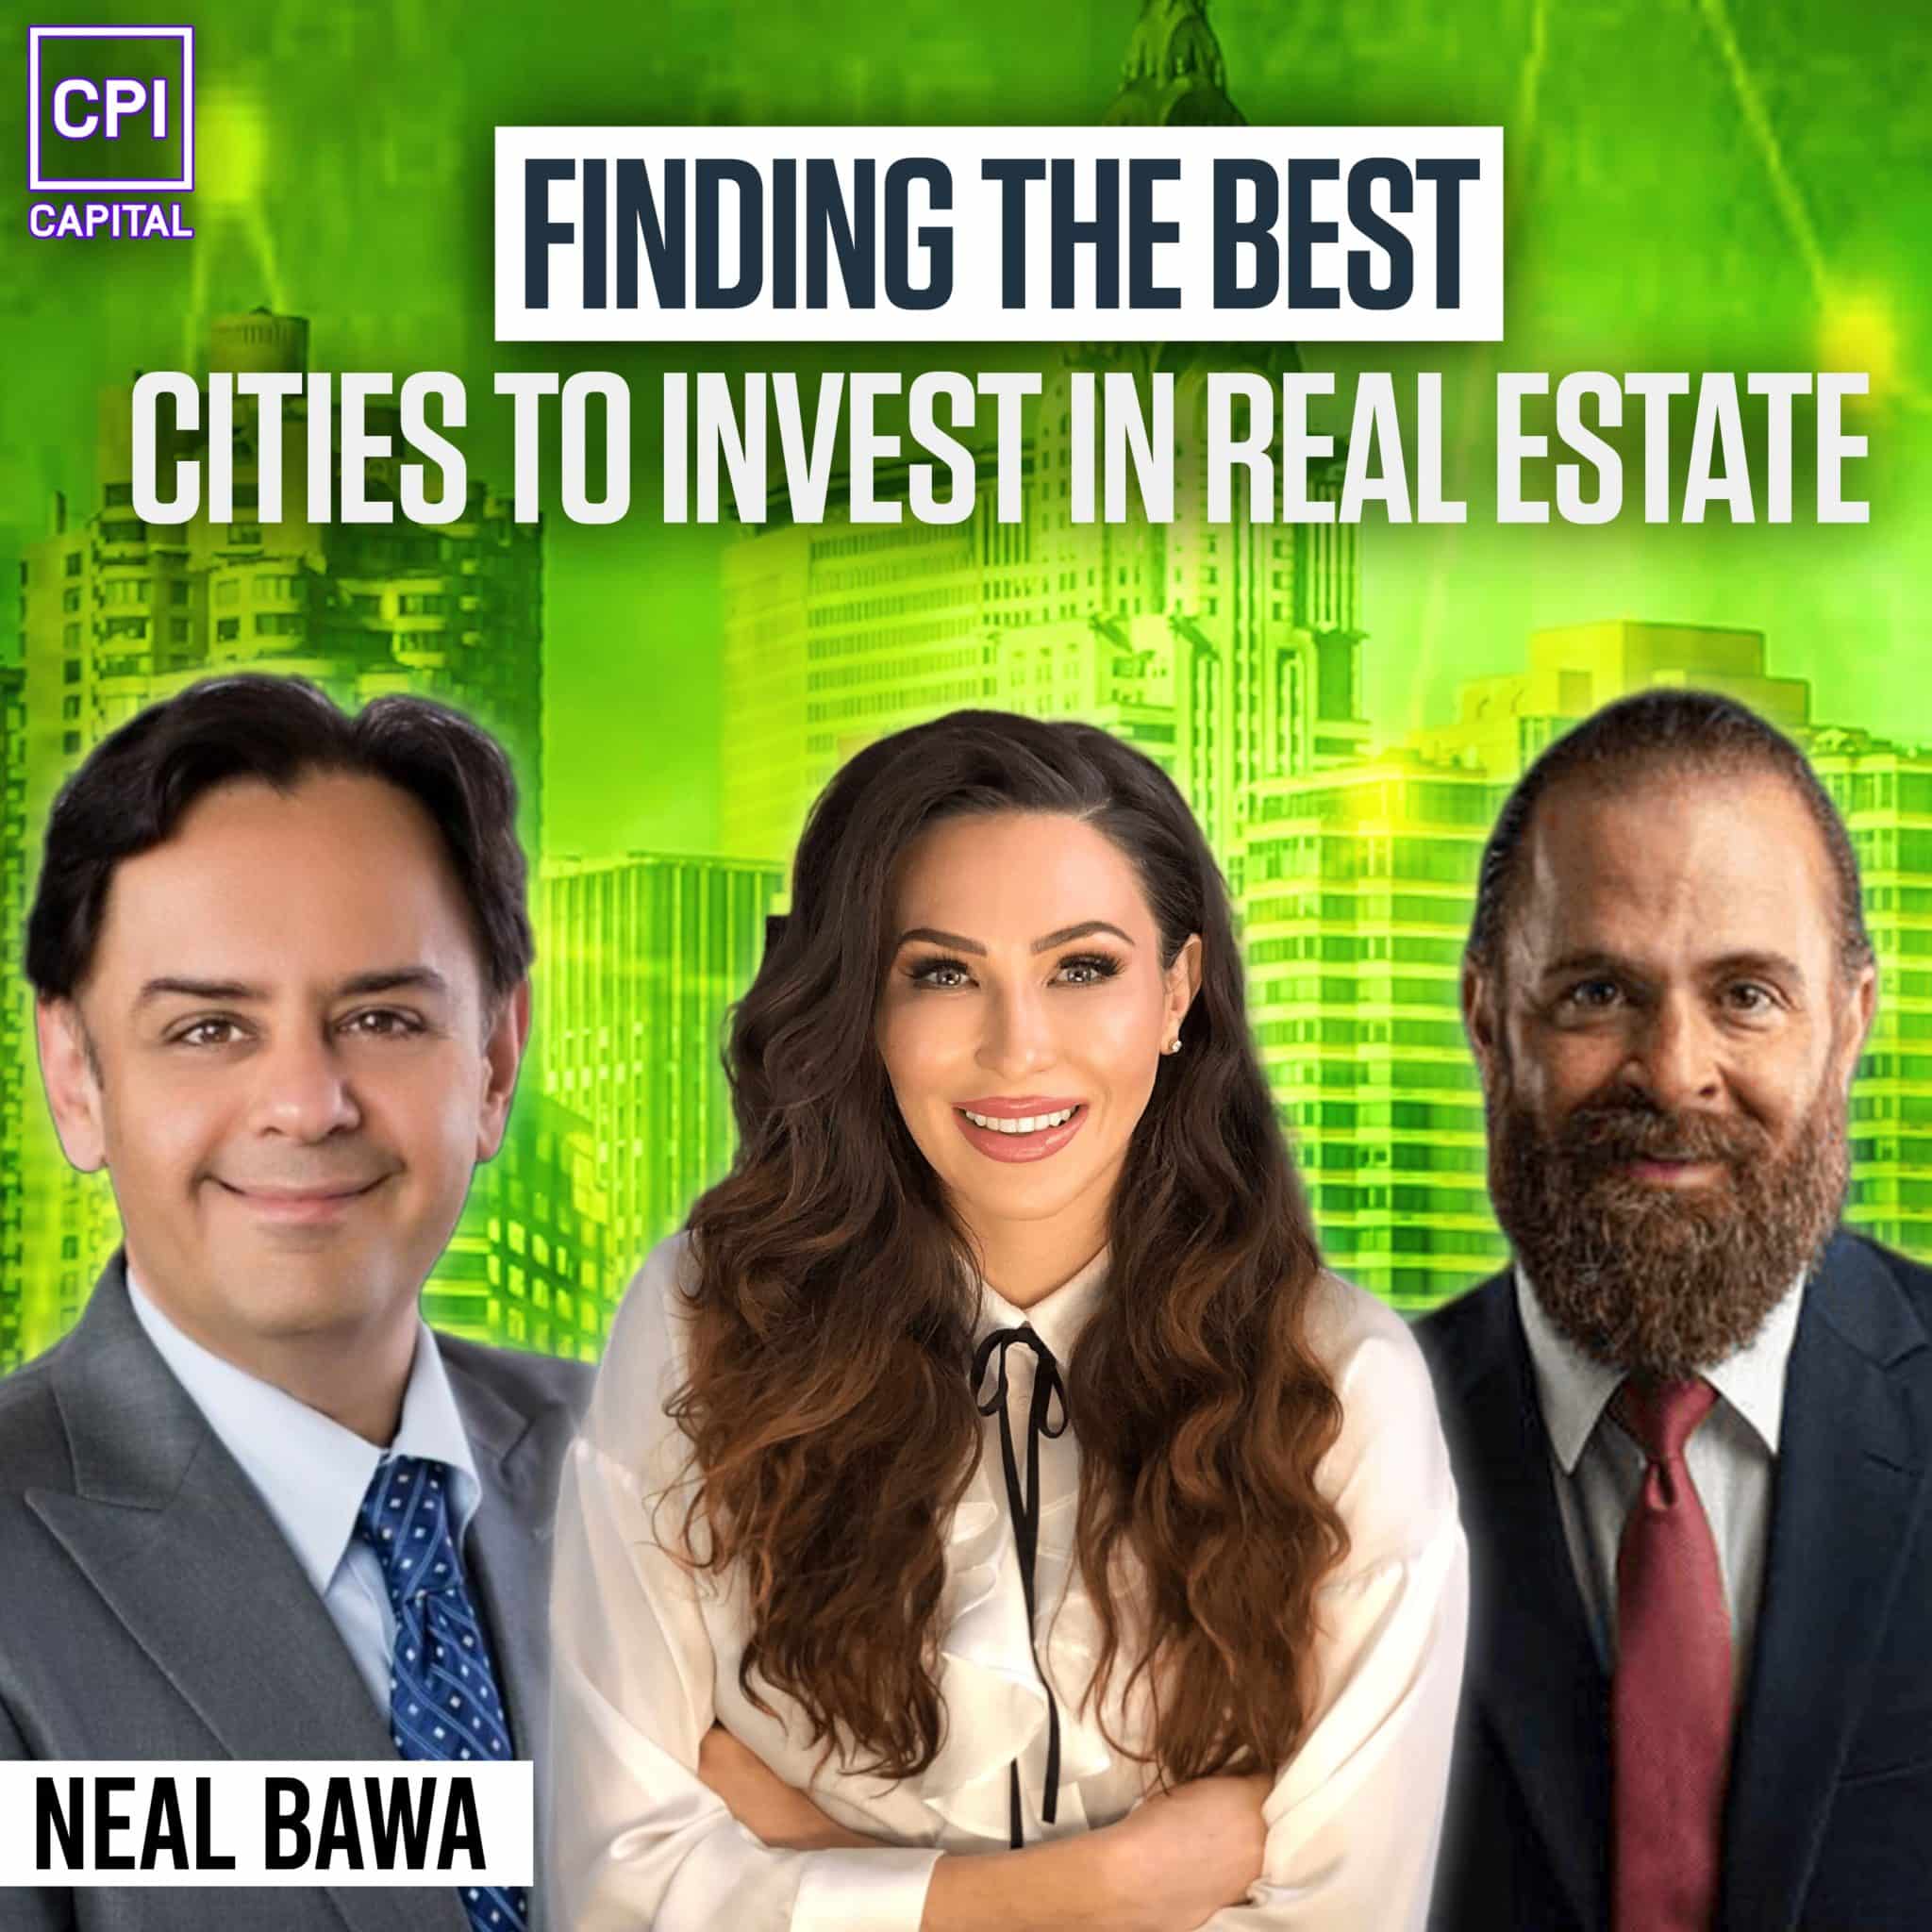 Finding The Best Cities To Invest In Real Estate – Neal Bawa